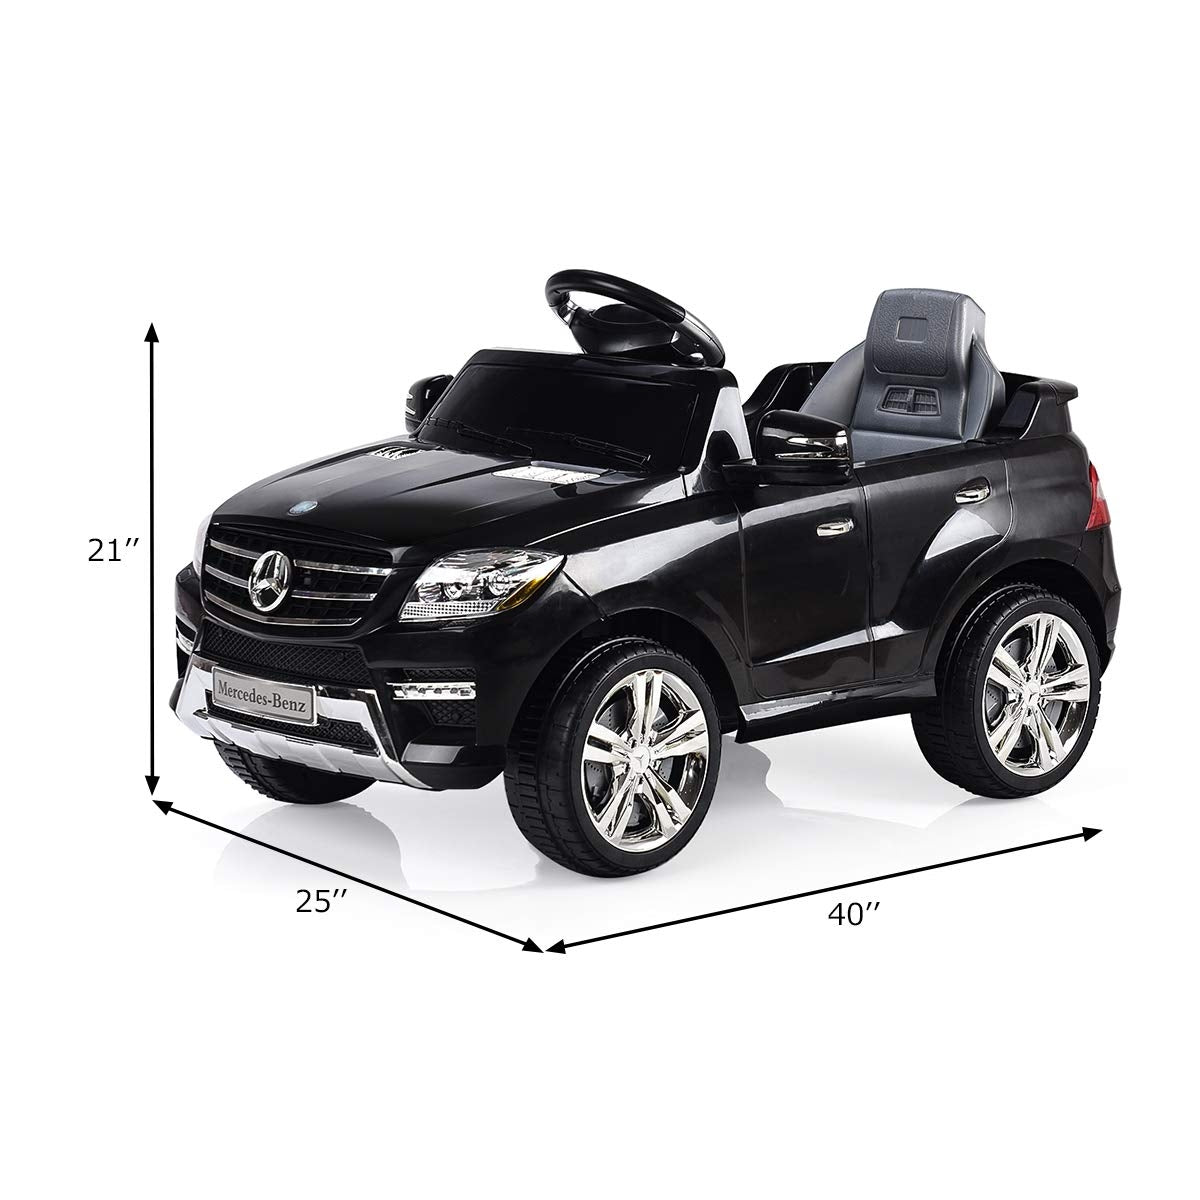 6V Mercedes Benz Kids Ride on Car with MP3+RC